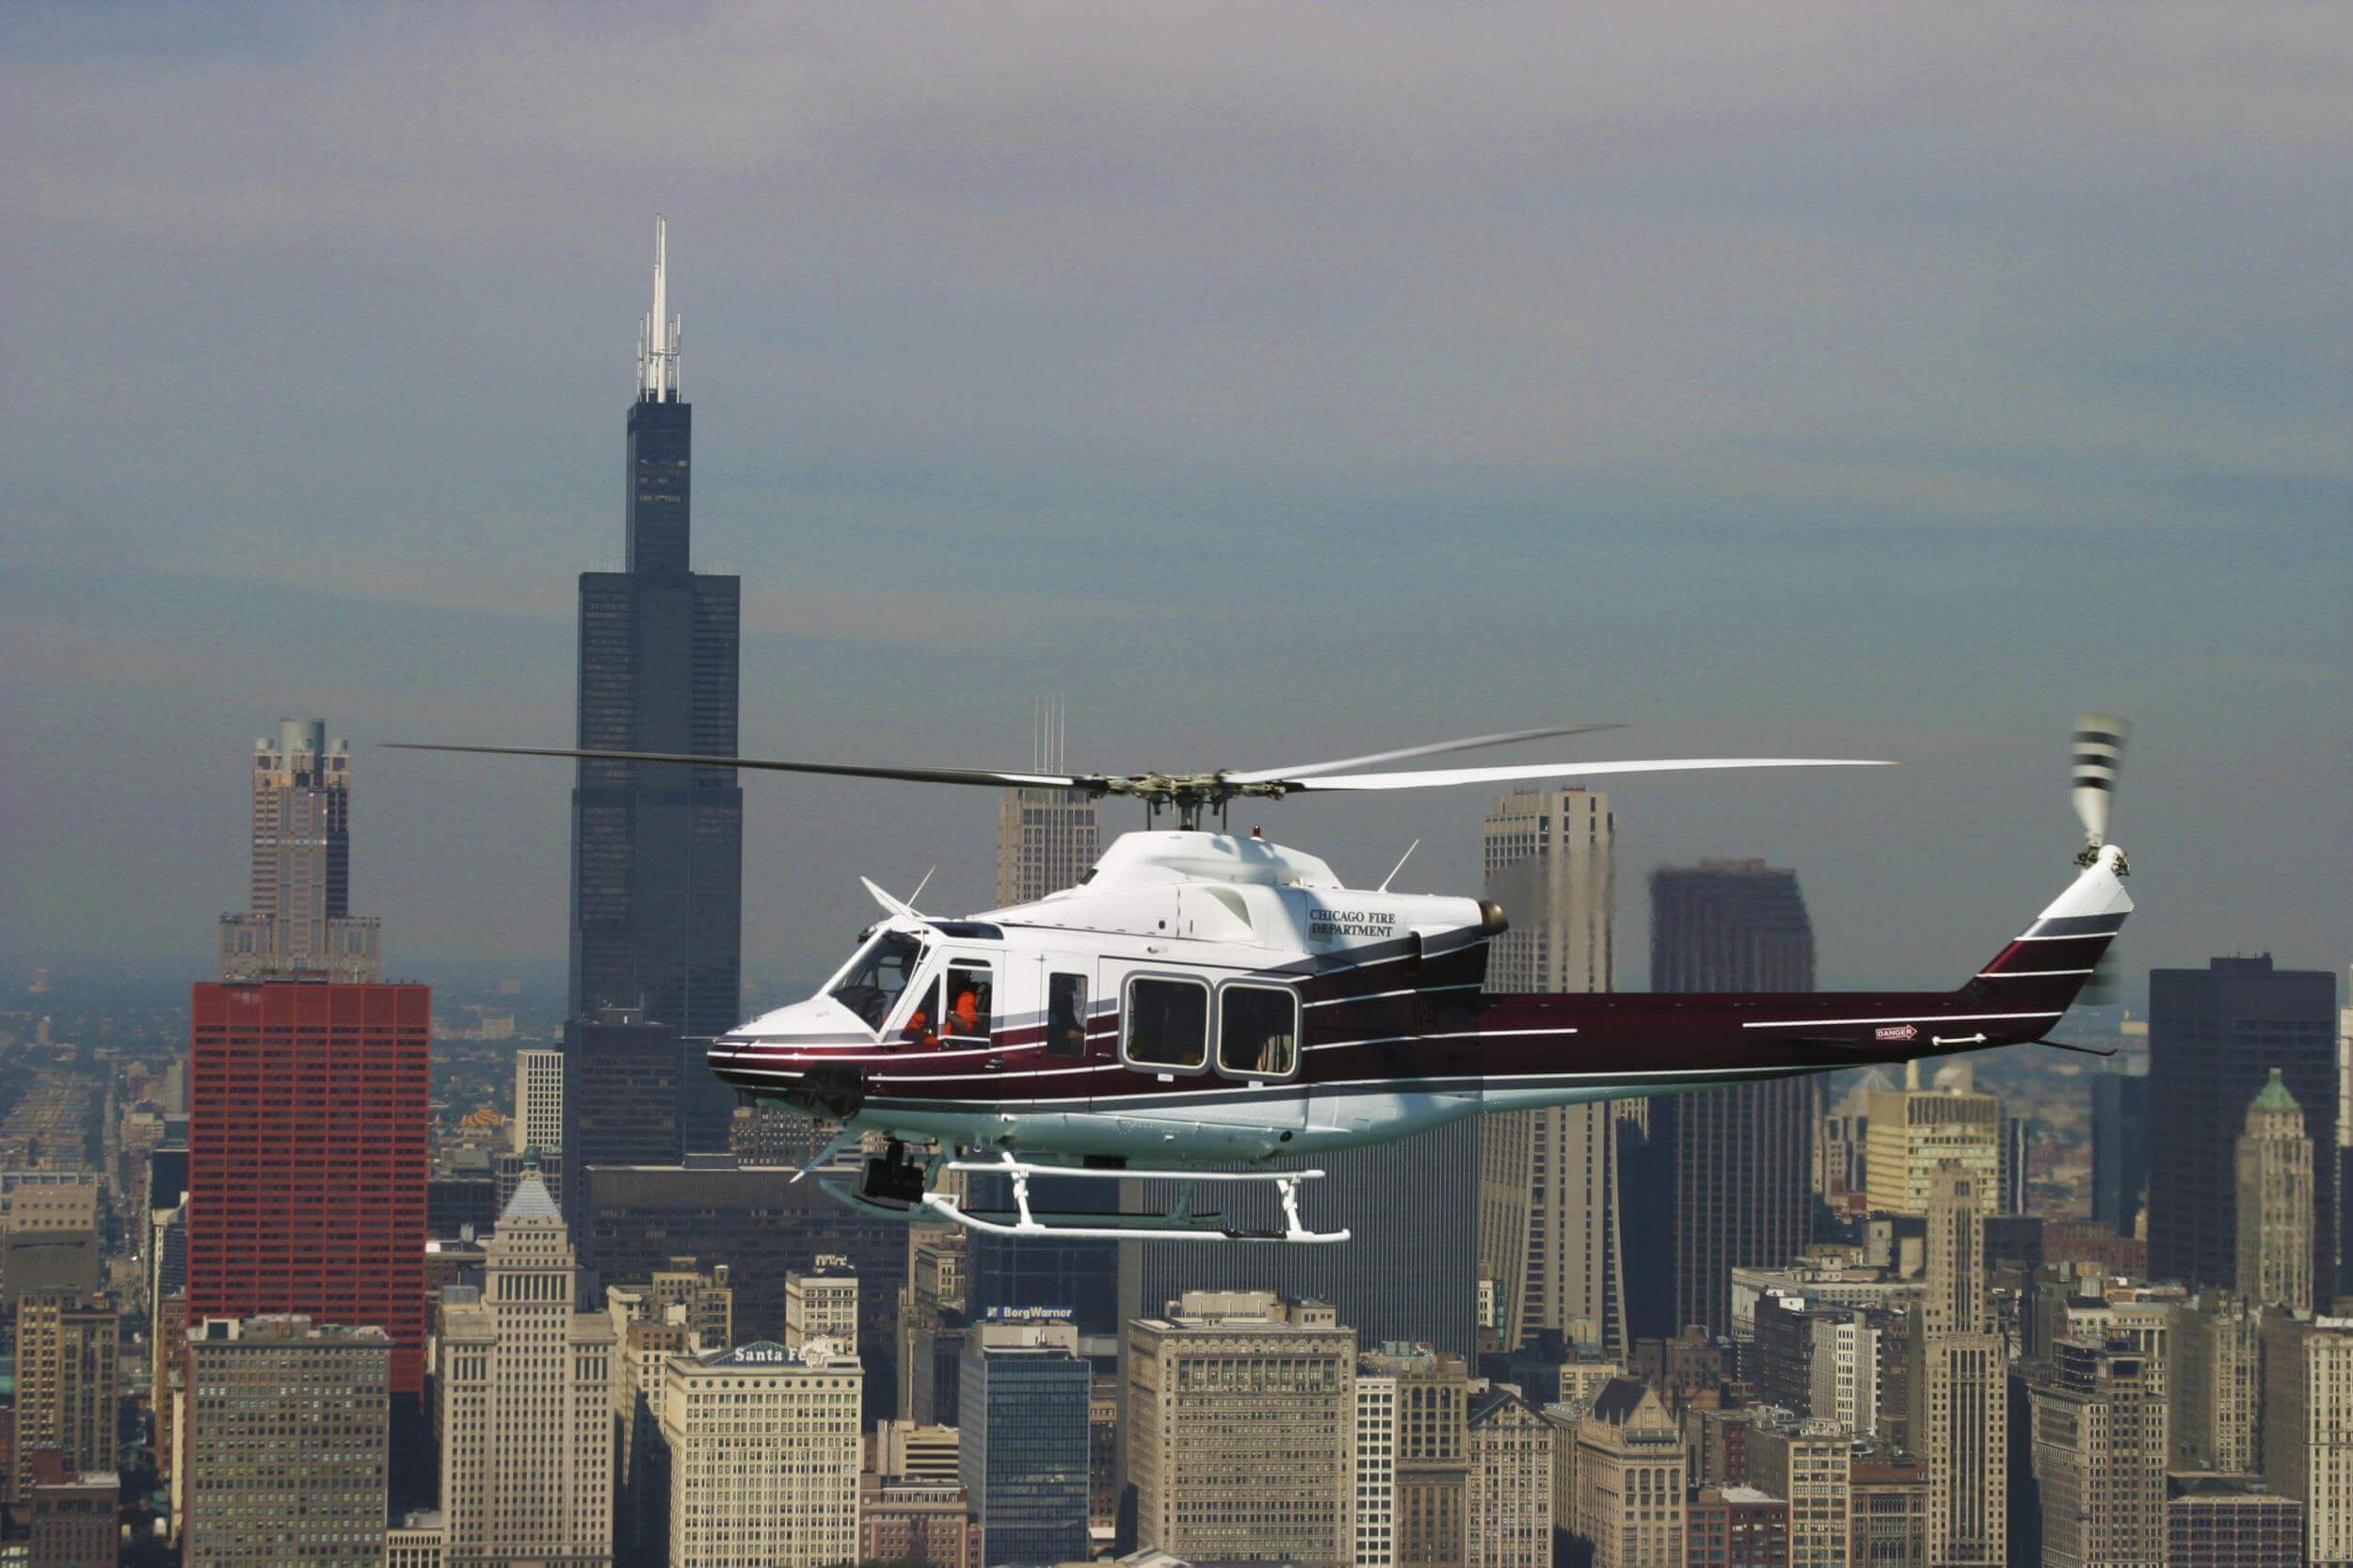 The Bell 412EP aircraft